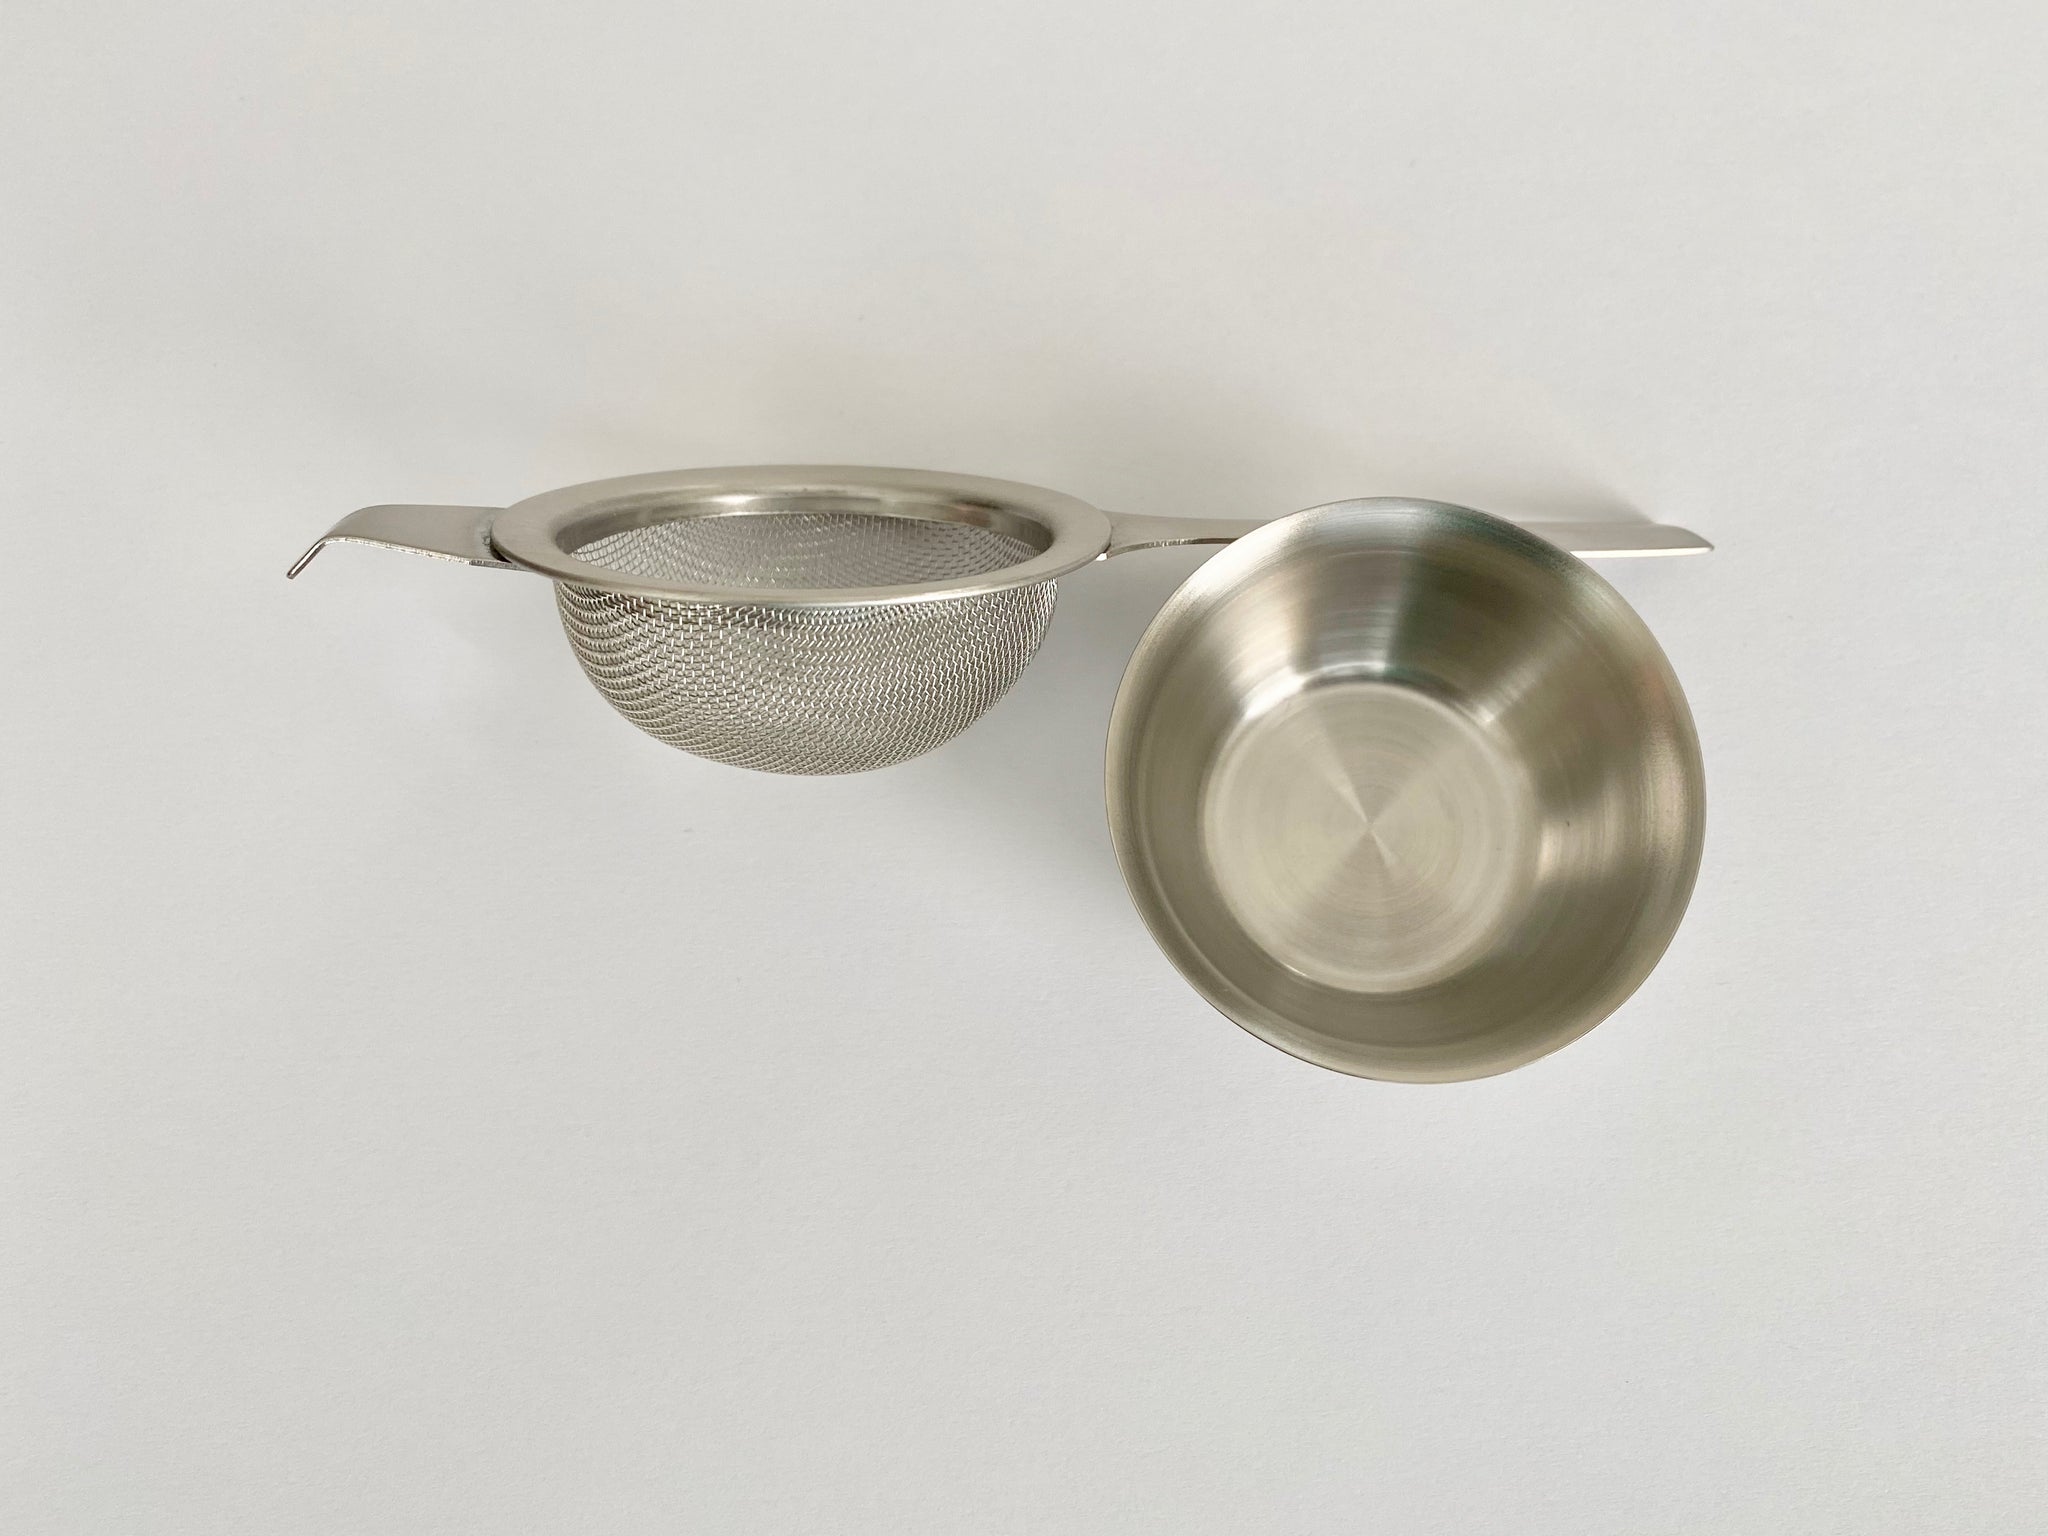 Stainless Steel Tea Strainer with Holder - Traditional and